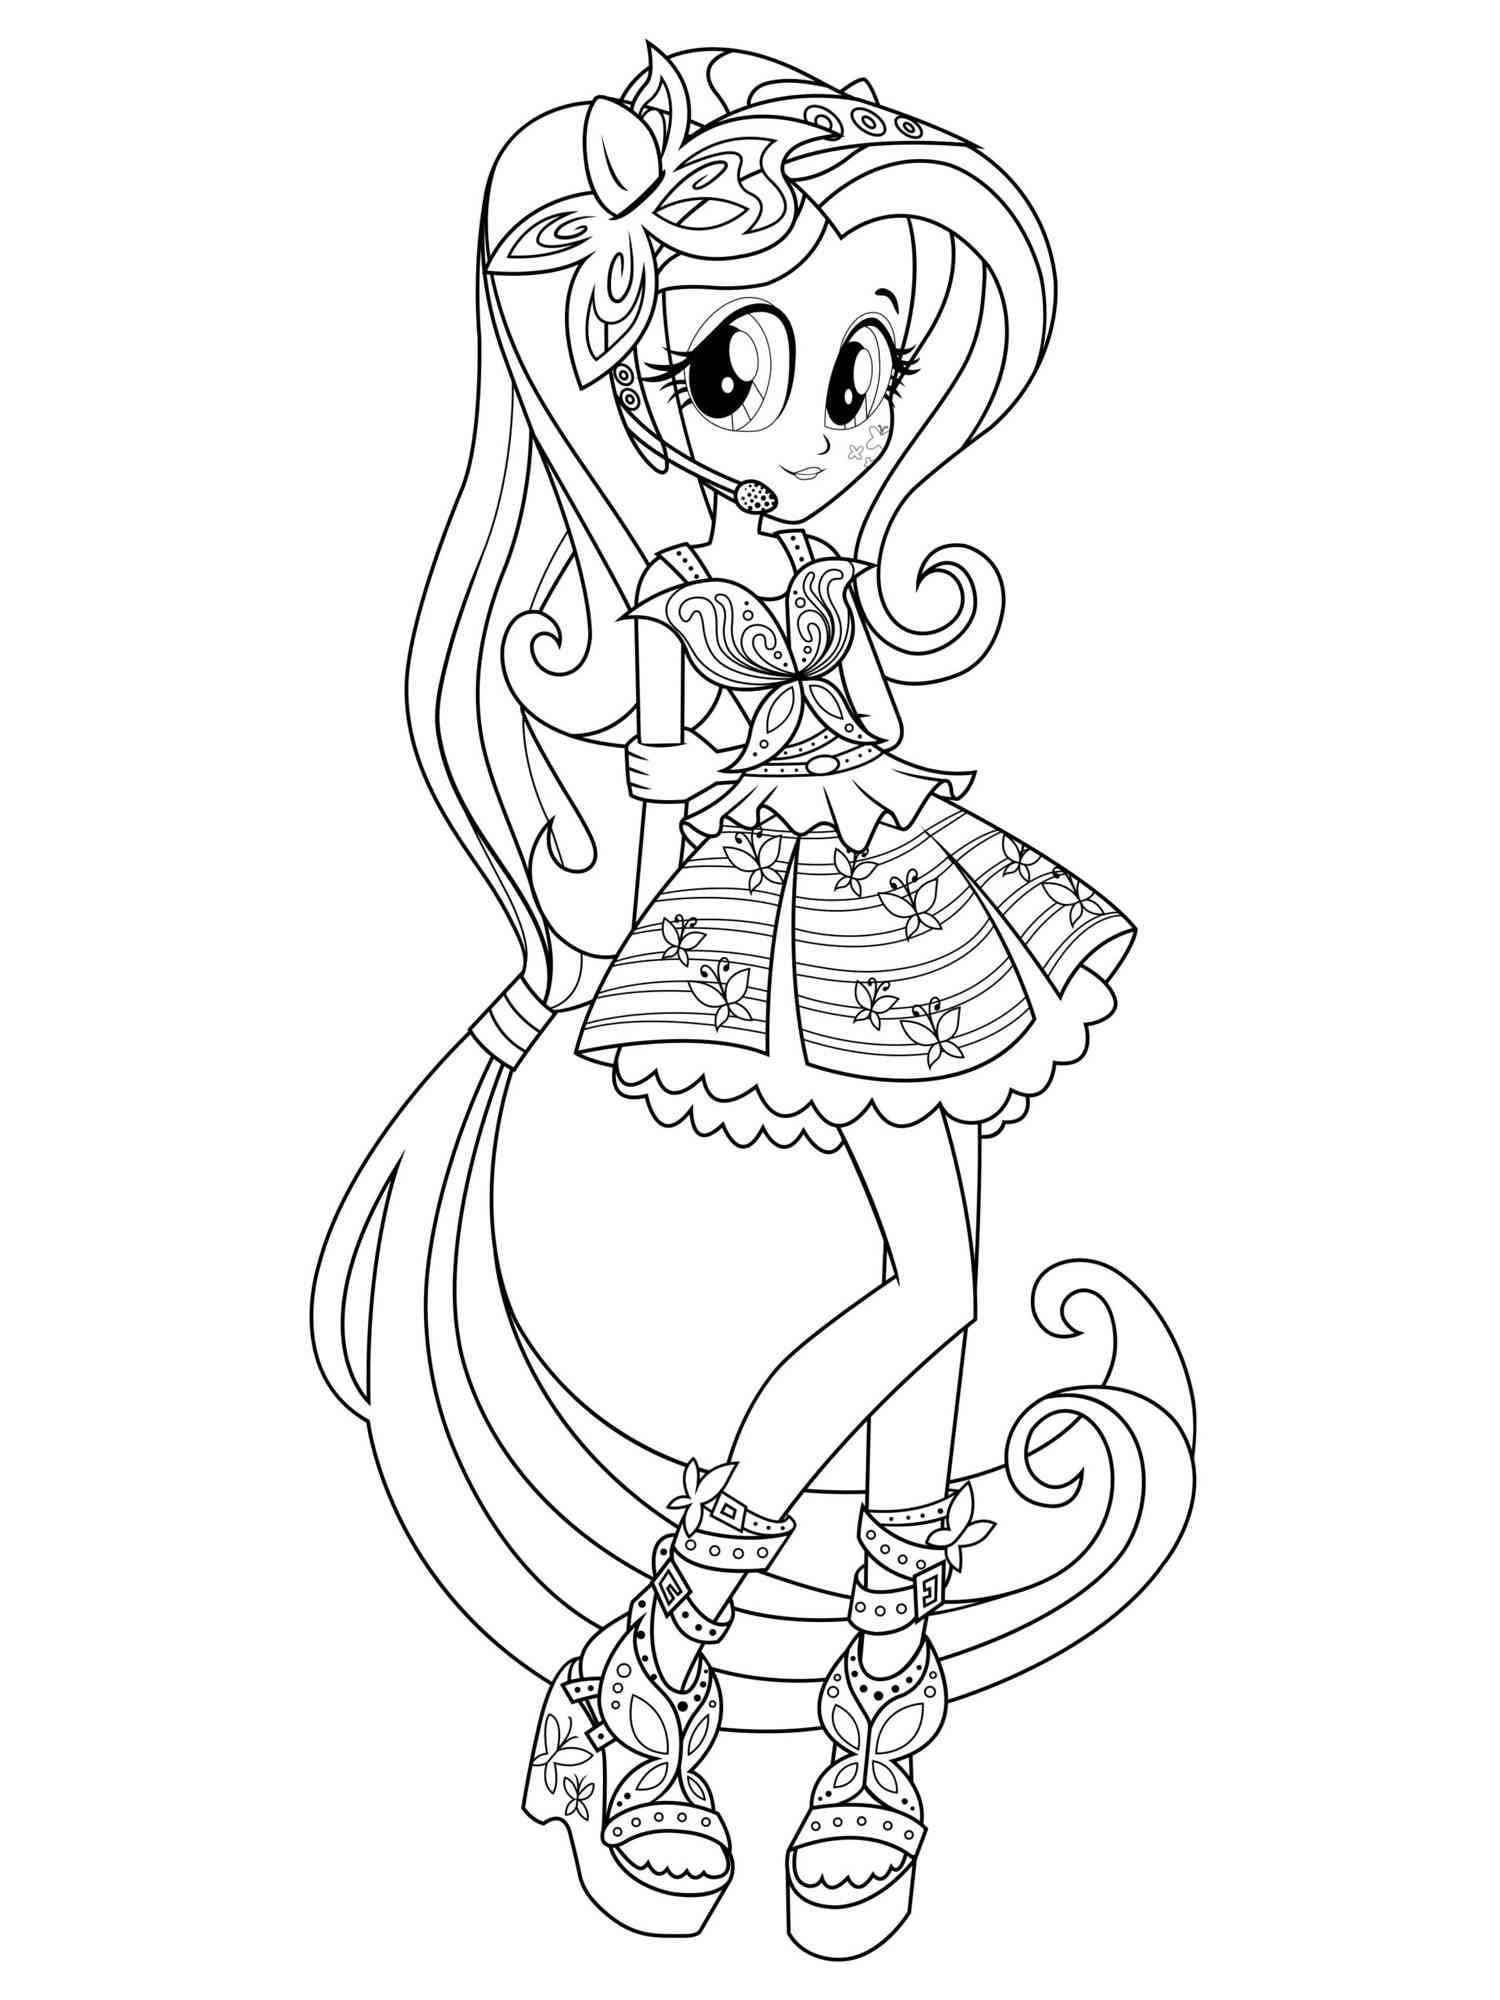 Equestria Girls 8 coloring page